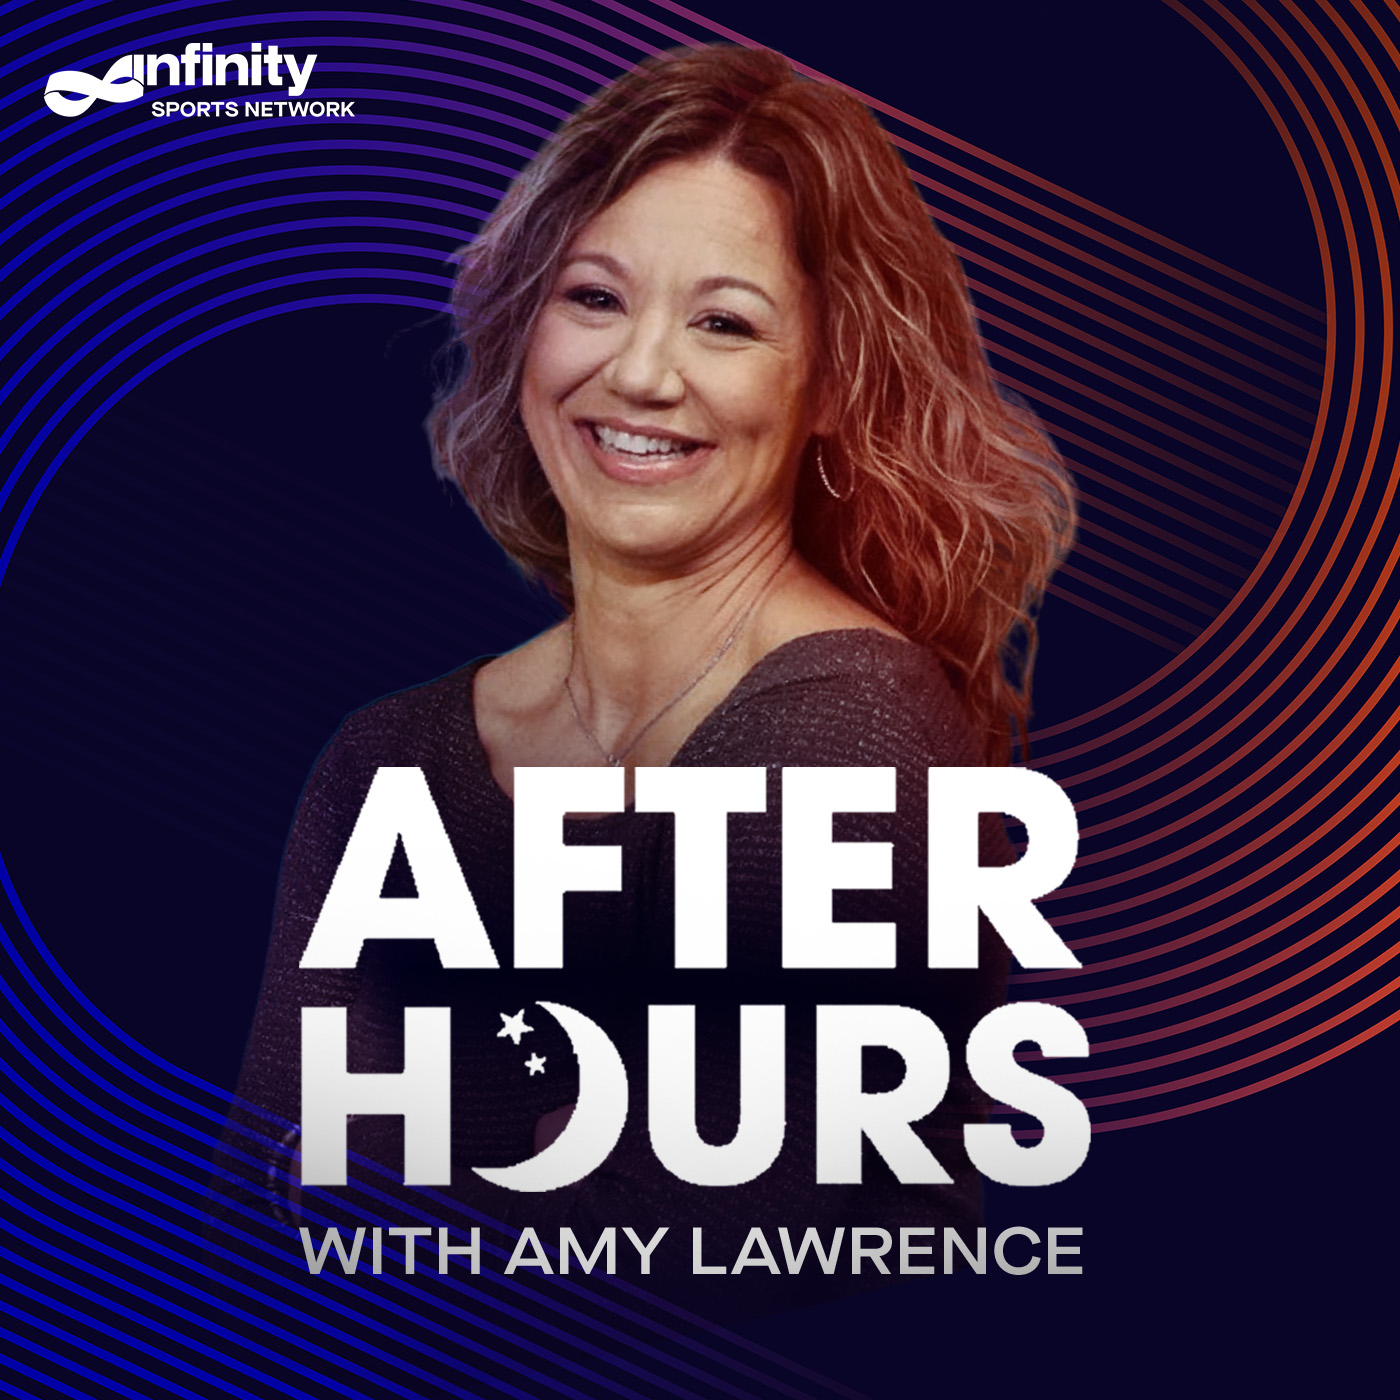 7/16/21 After Hours with Amy Lawrence PODCAST: Hour 2